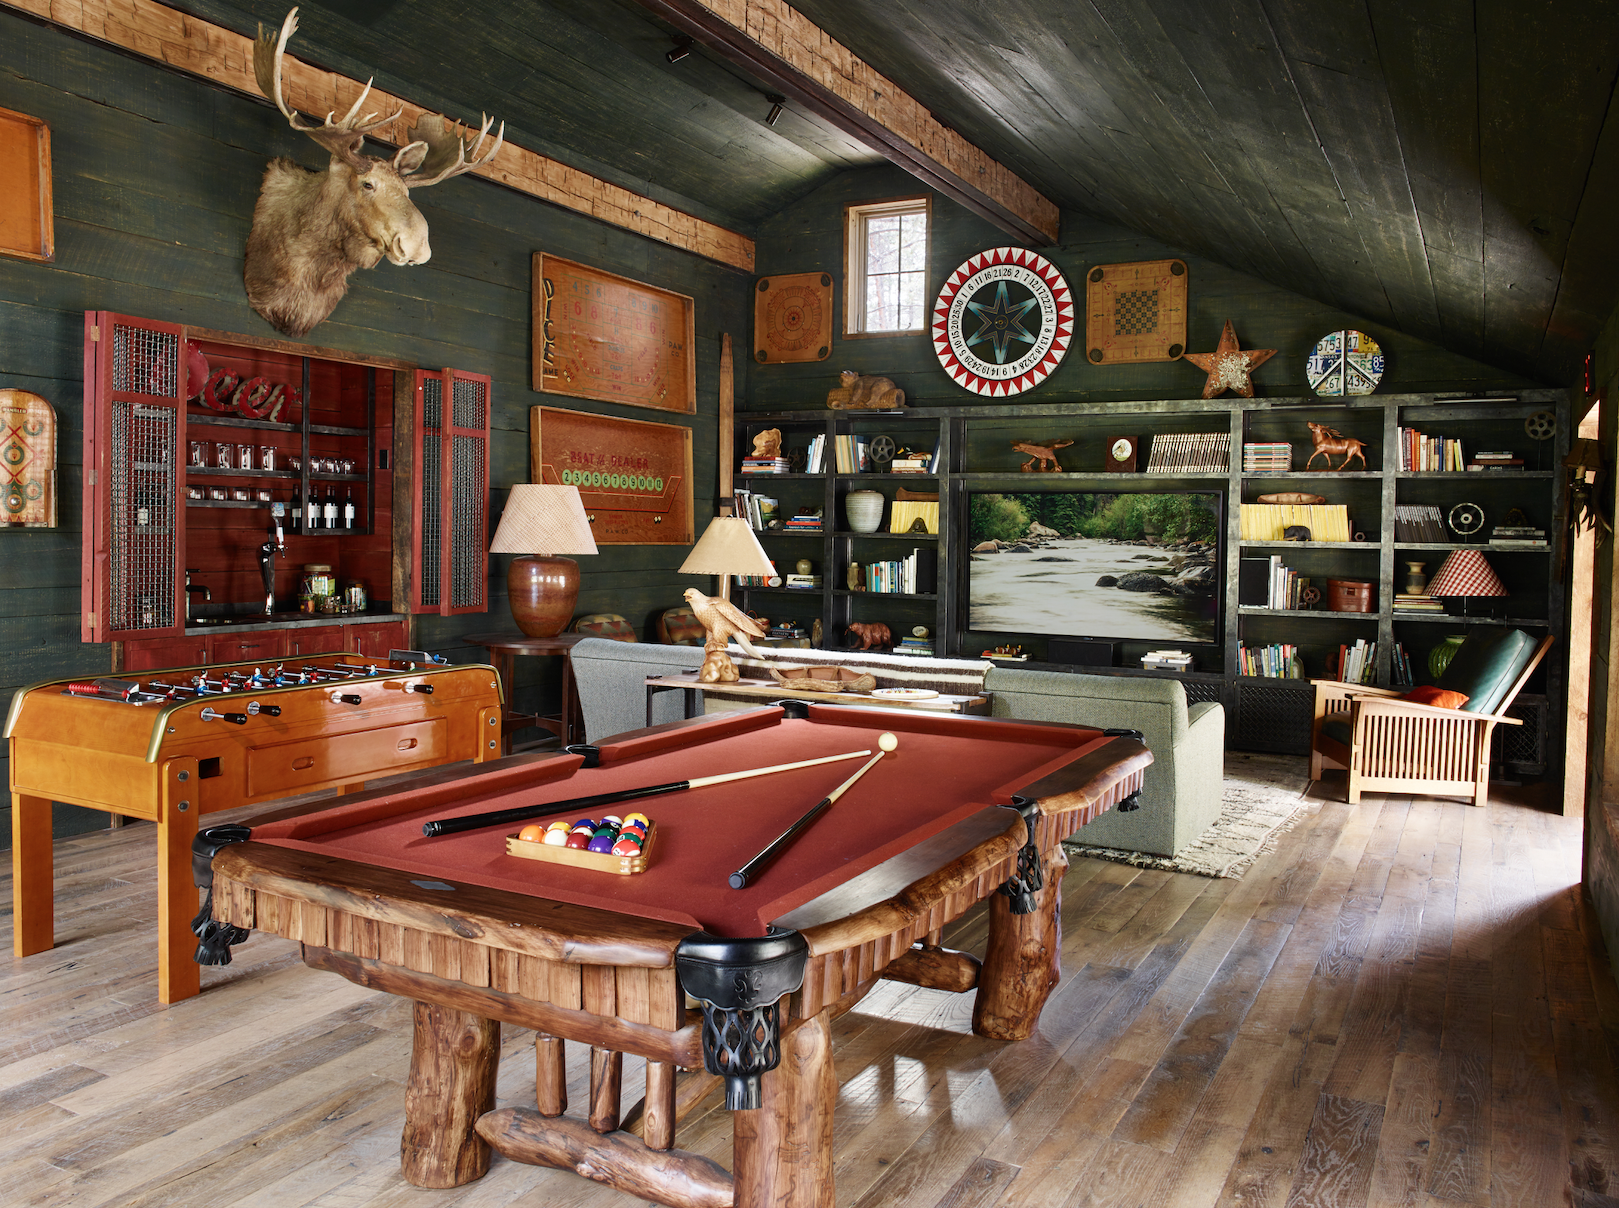   Game room at Taylor River Lodge (photo credit: Eleven Experience)  